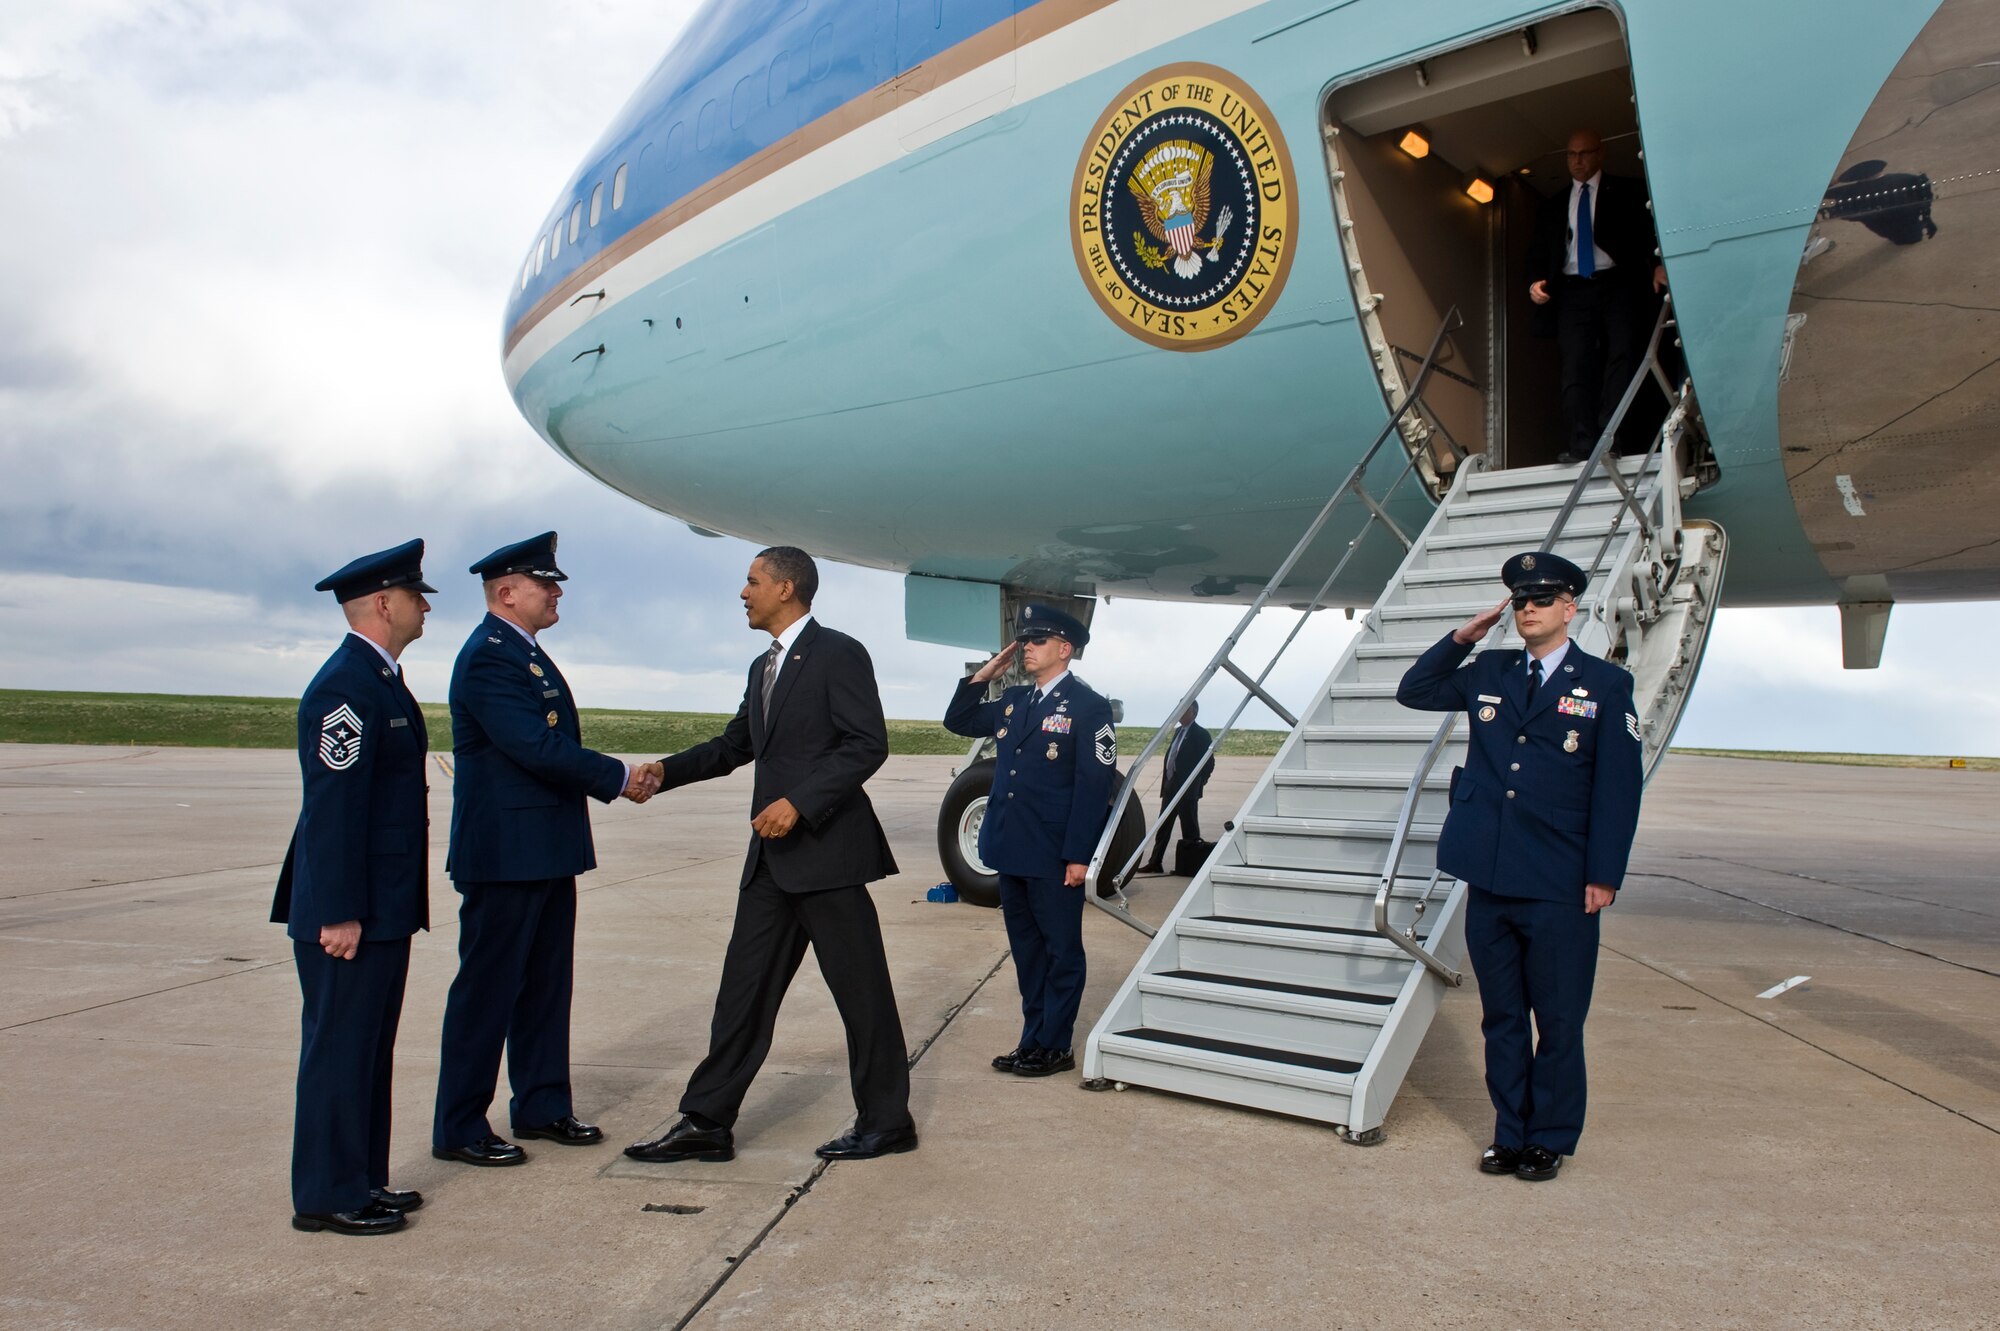 BUCKLEY AIR FORCE BASE, Colo. -- President Barack Obama is greeted by Col. Daniel Dant, 460th Space Wing commander, middle, and Chief Master Sgt. William Ward, 460th Space Wing command chief, left, April 24, 2012. Obama arrived at Buckley AFB on his way to speak at the University of Colorado Boulder. (U.S. Air Force photo by Airman 1st Class Riley Johnson)